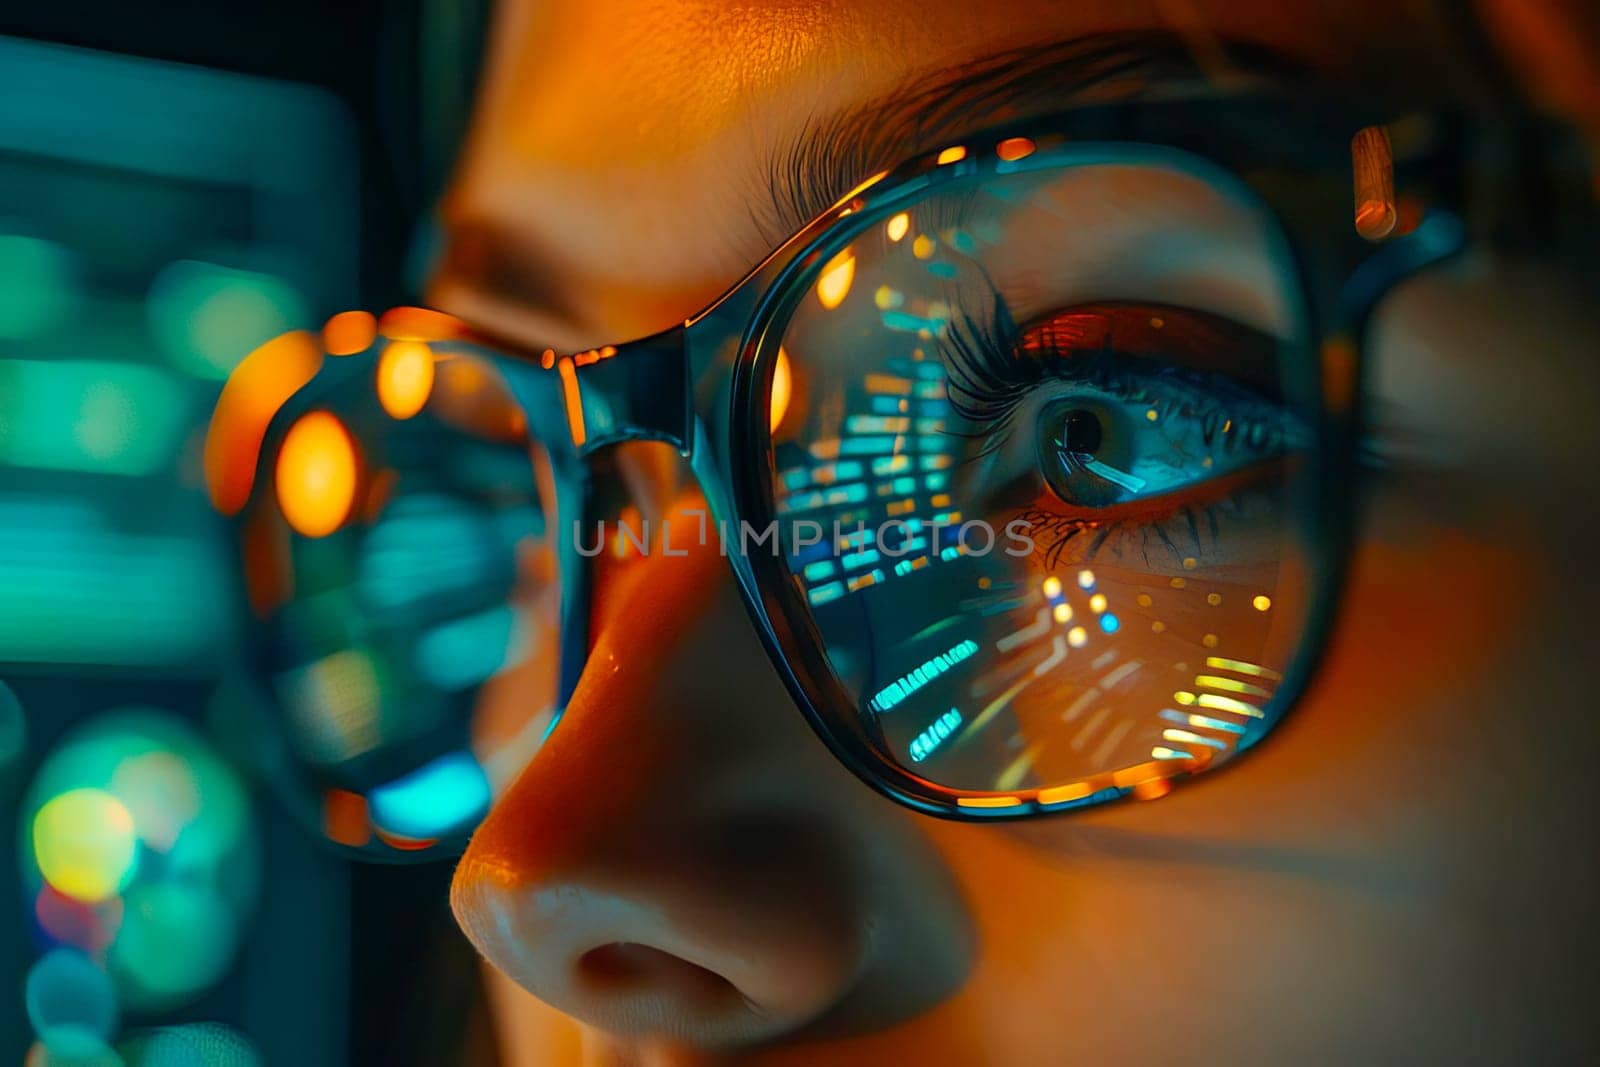 A detailed view of a persons eyes and glasses with a computer monitor reflecting in the lenses.